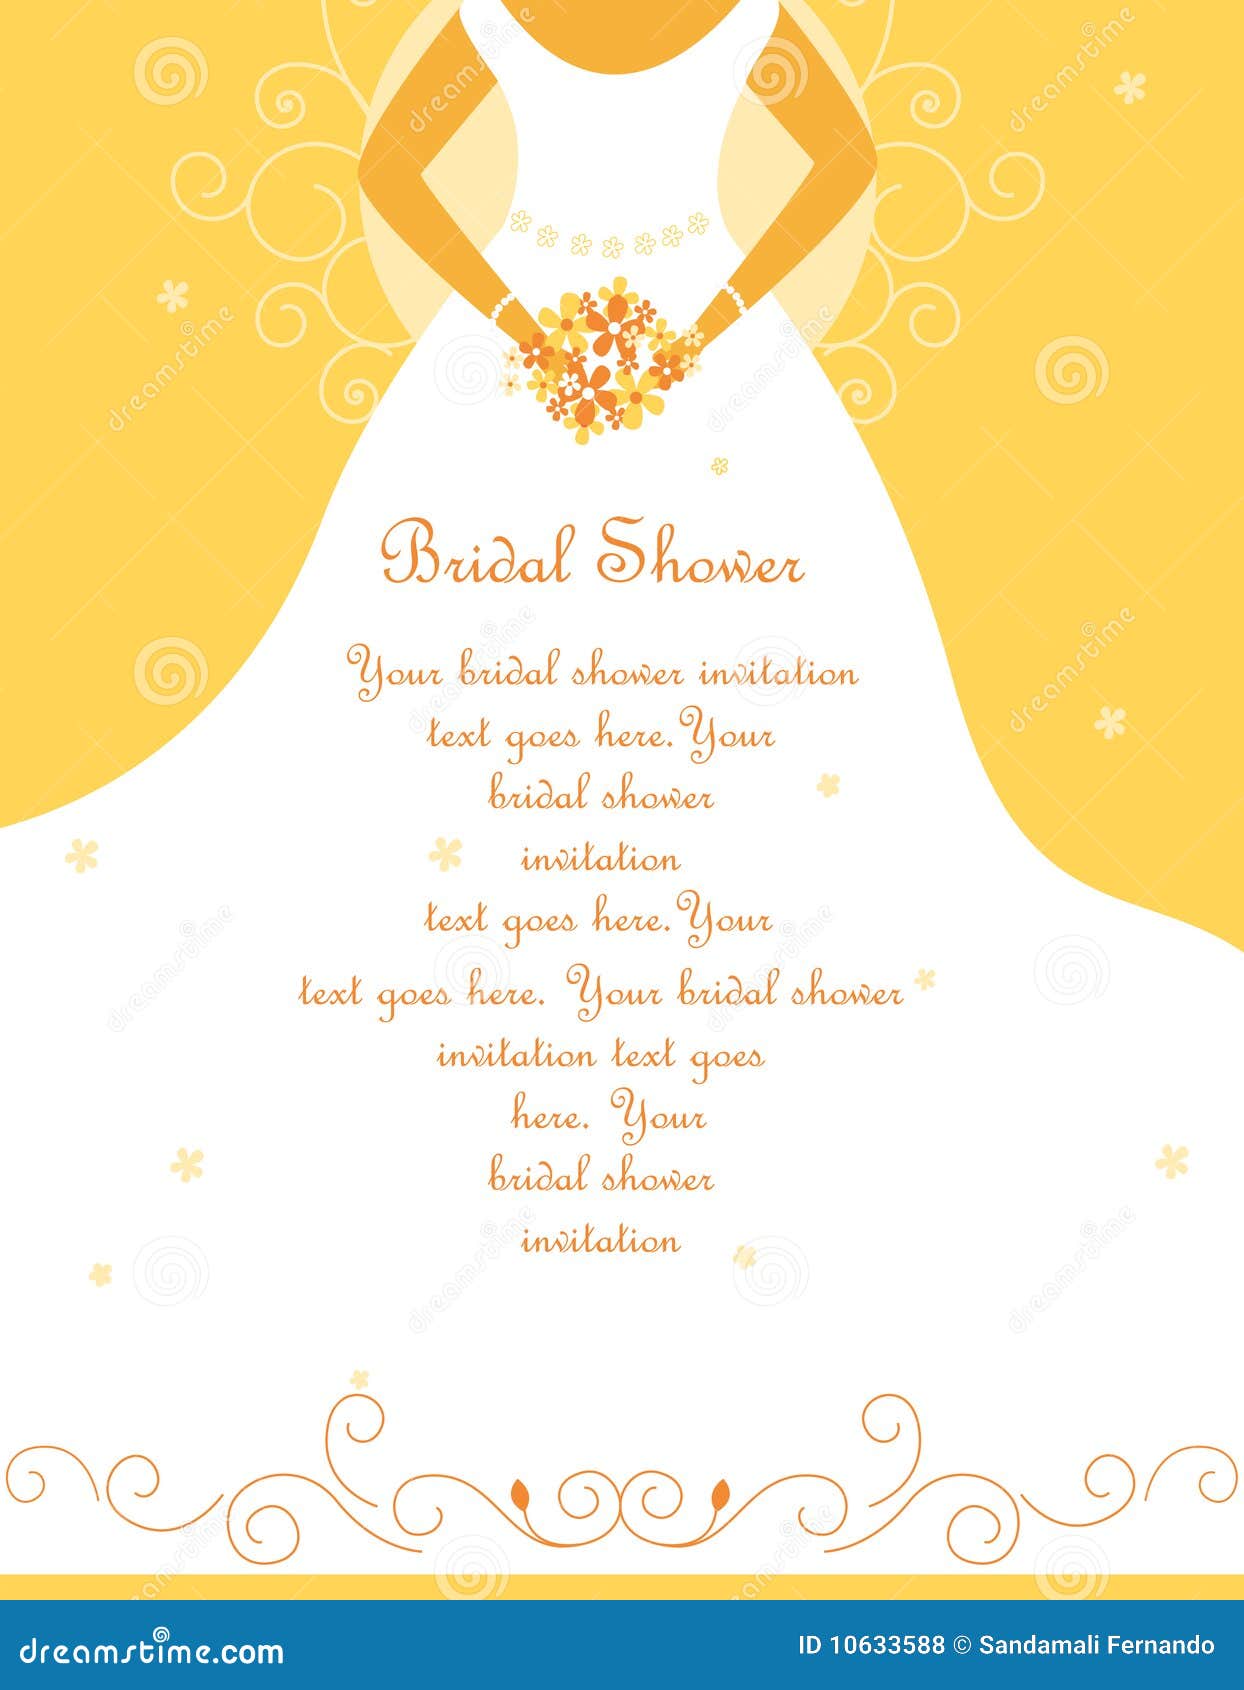 Bridal shower / wedding invitation card background with a beautiful ...